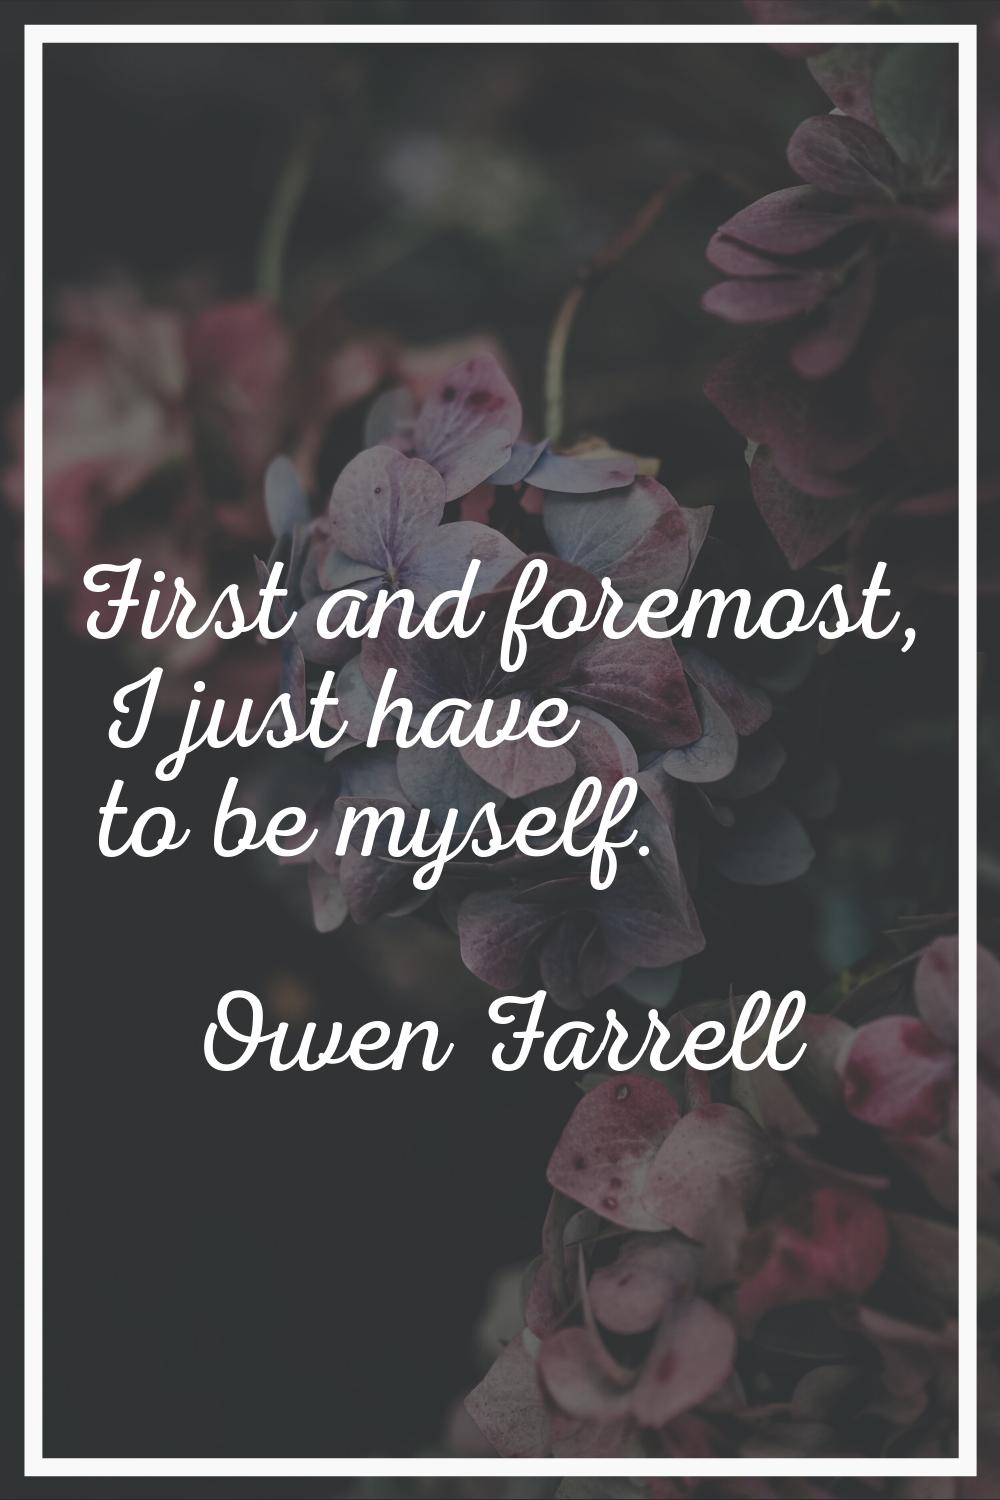 First and foremost, I just have to be myself.